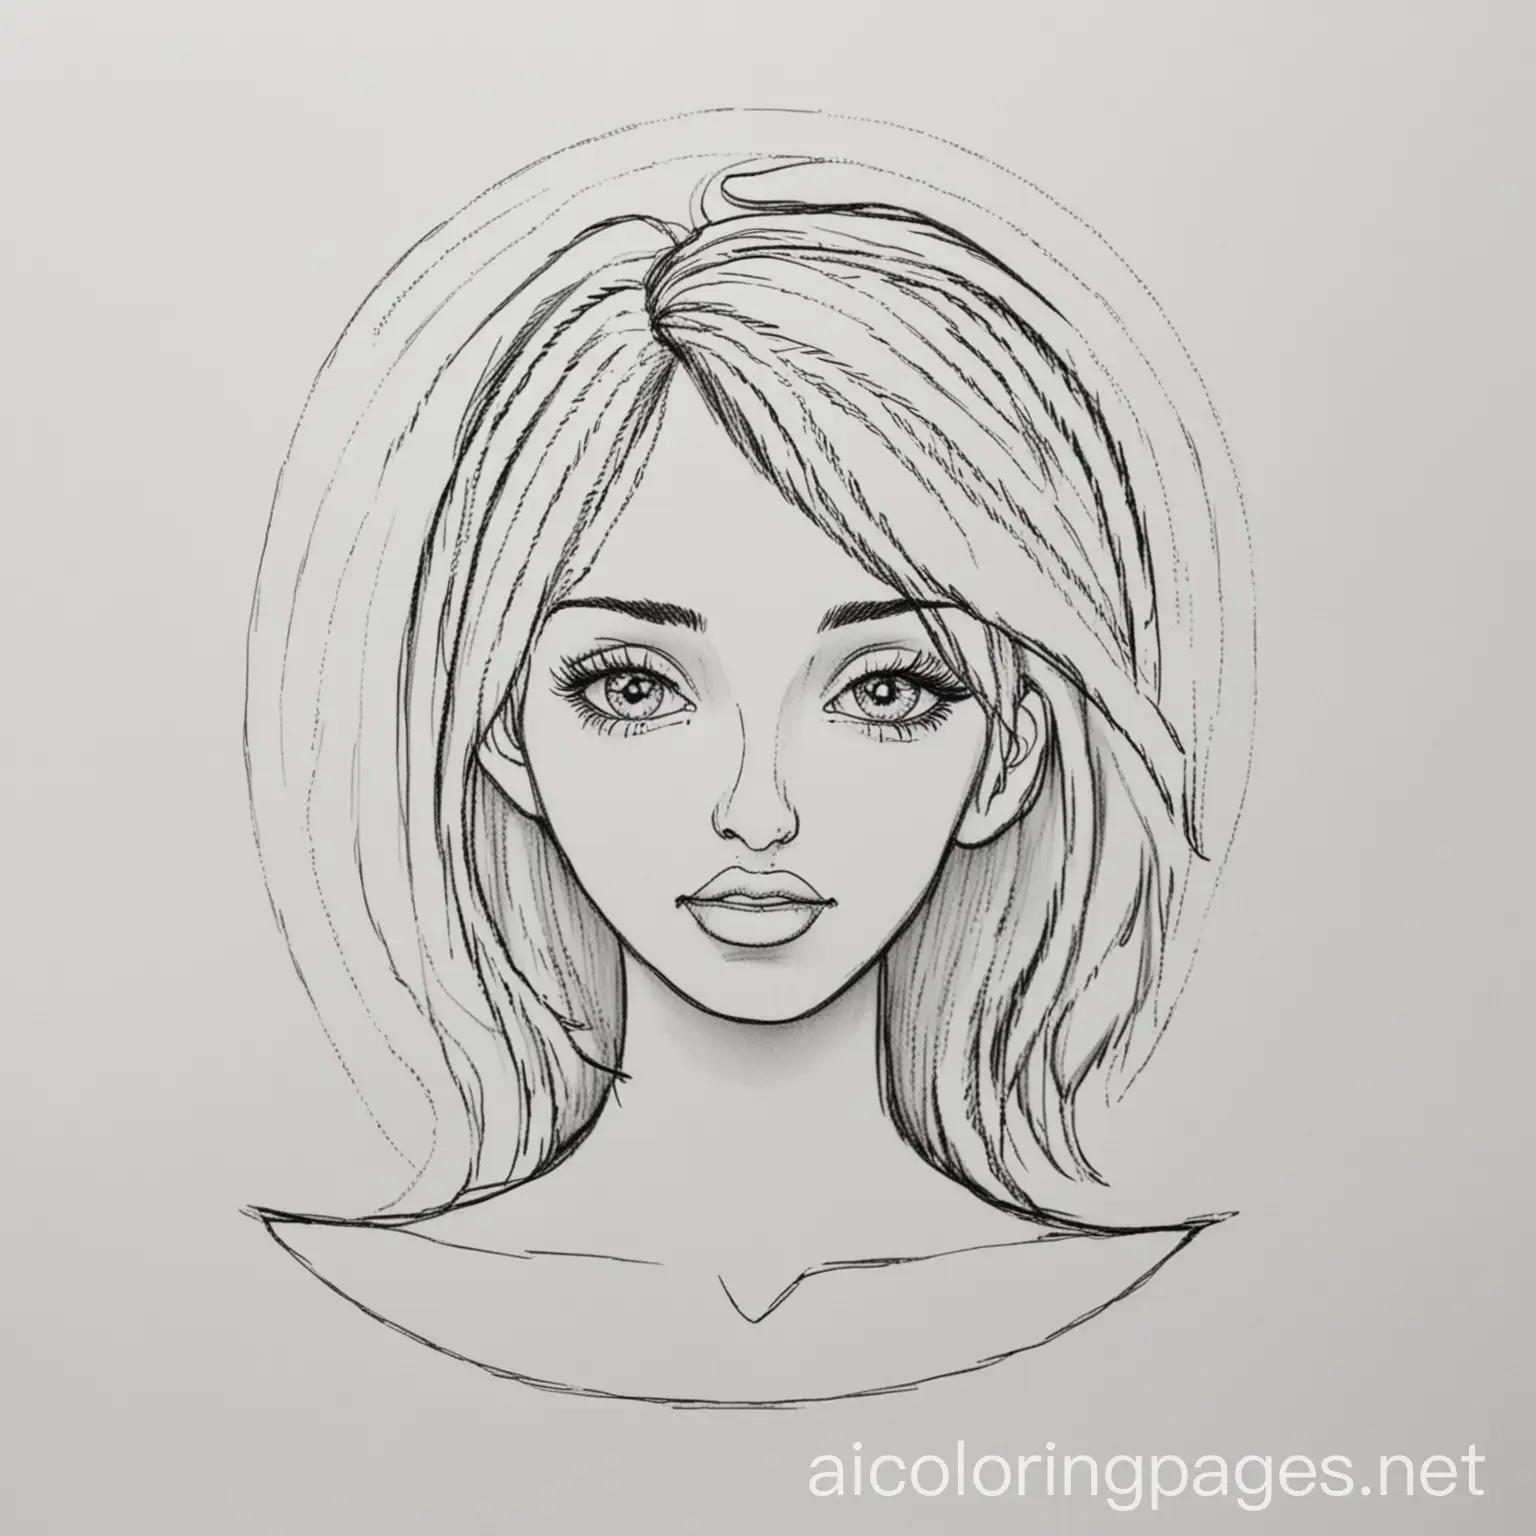 Z, Coloring Page, black and white, line art, white background, Simplicity, Ample White Space. The background of the coloring page is plain white to make it easy for young children to color within the lines. The outlines of all the subjects are easy to distinguish, making it simple for kids to color without too much difficulty